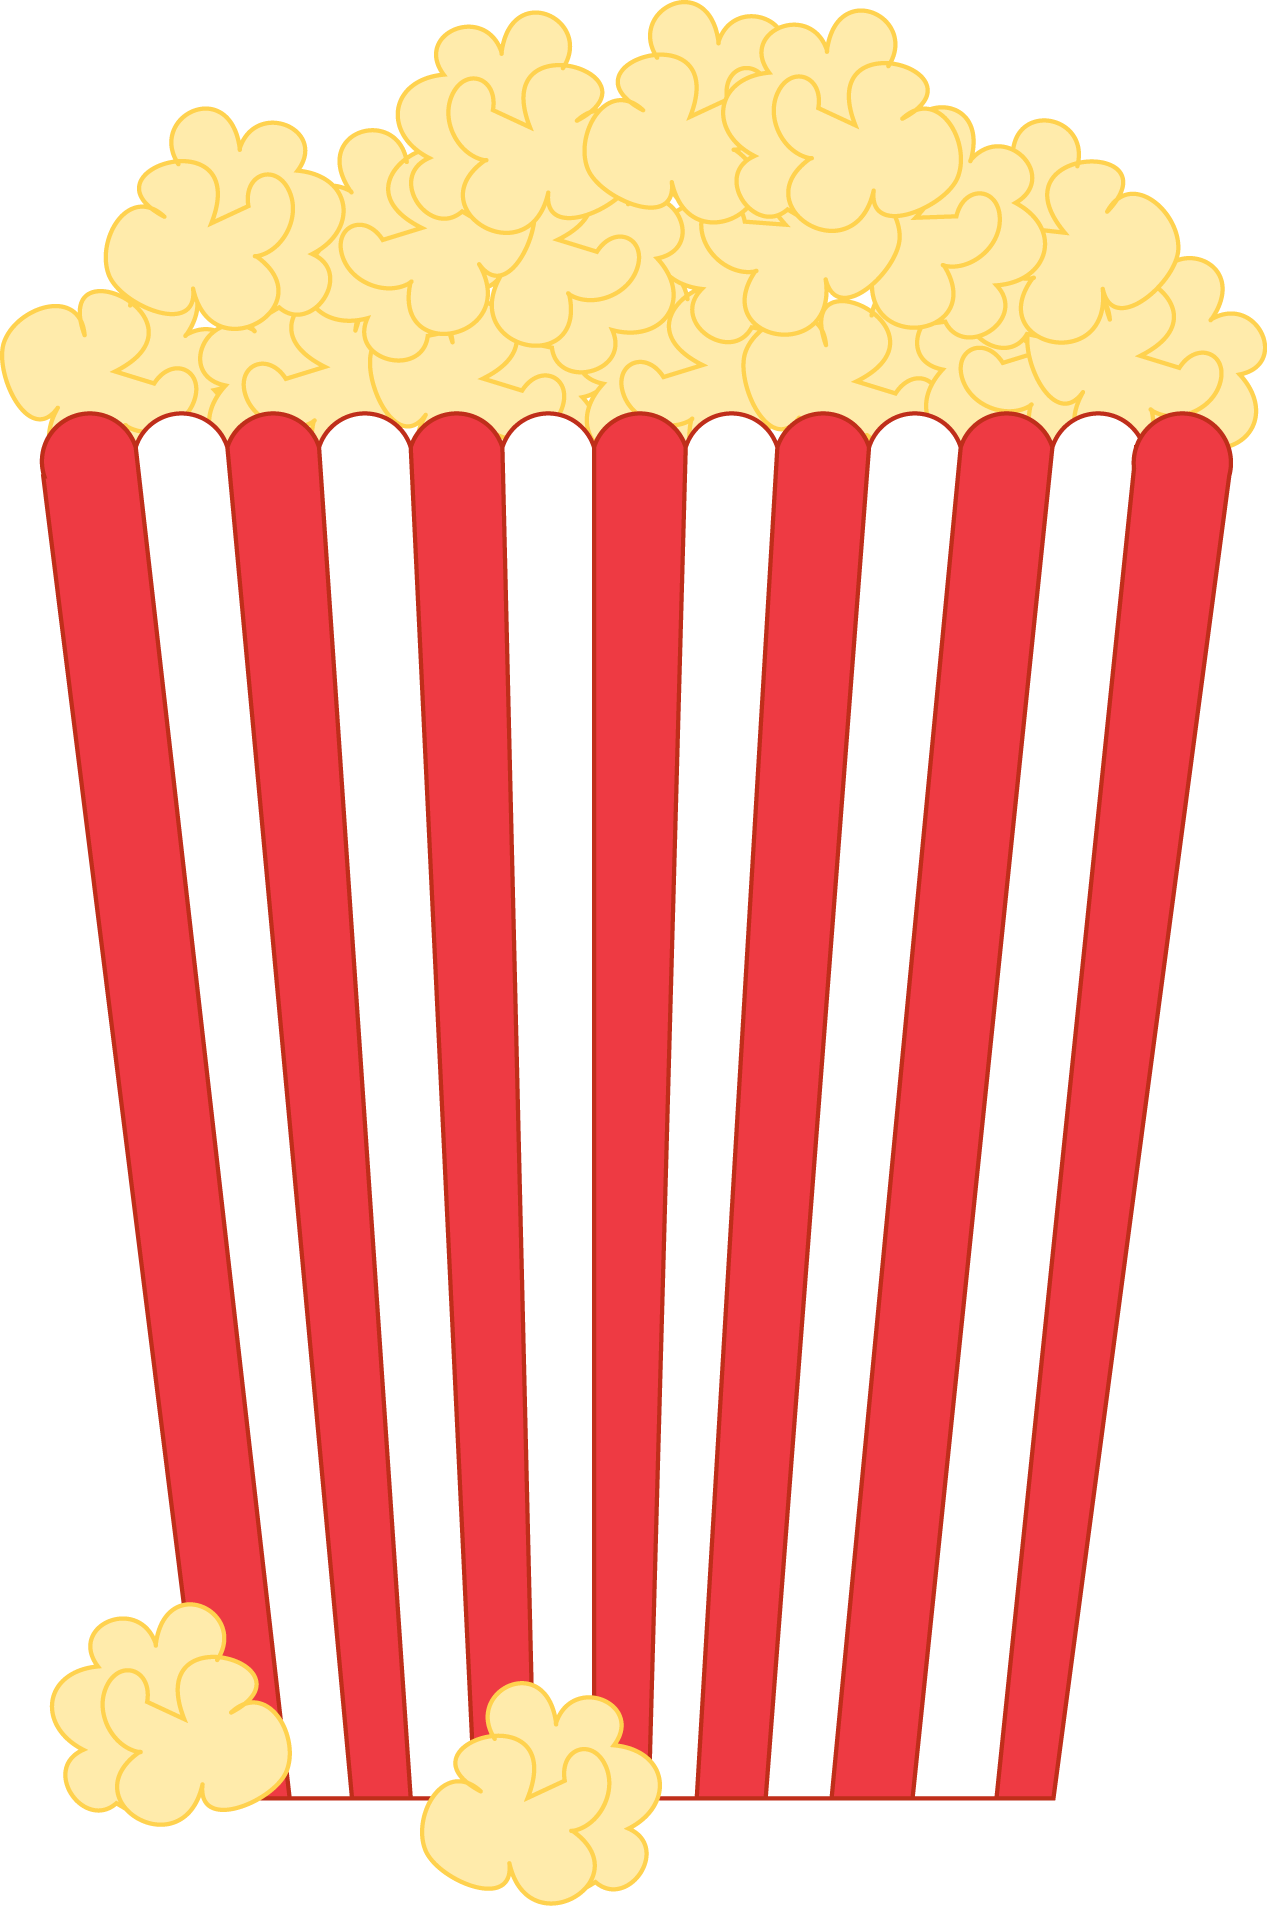 Theme party print out. Movie clipart basket